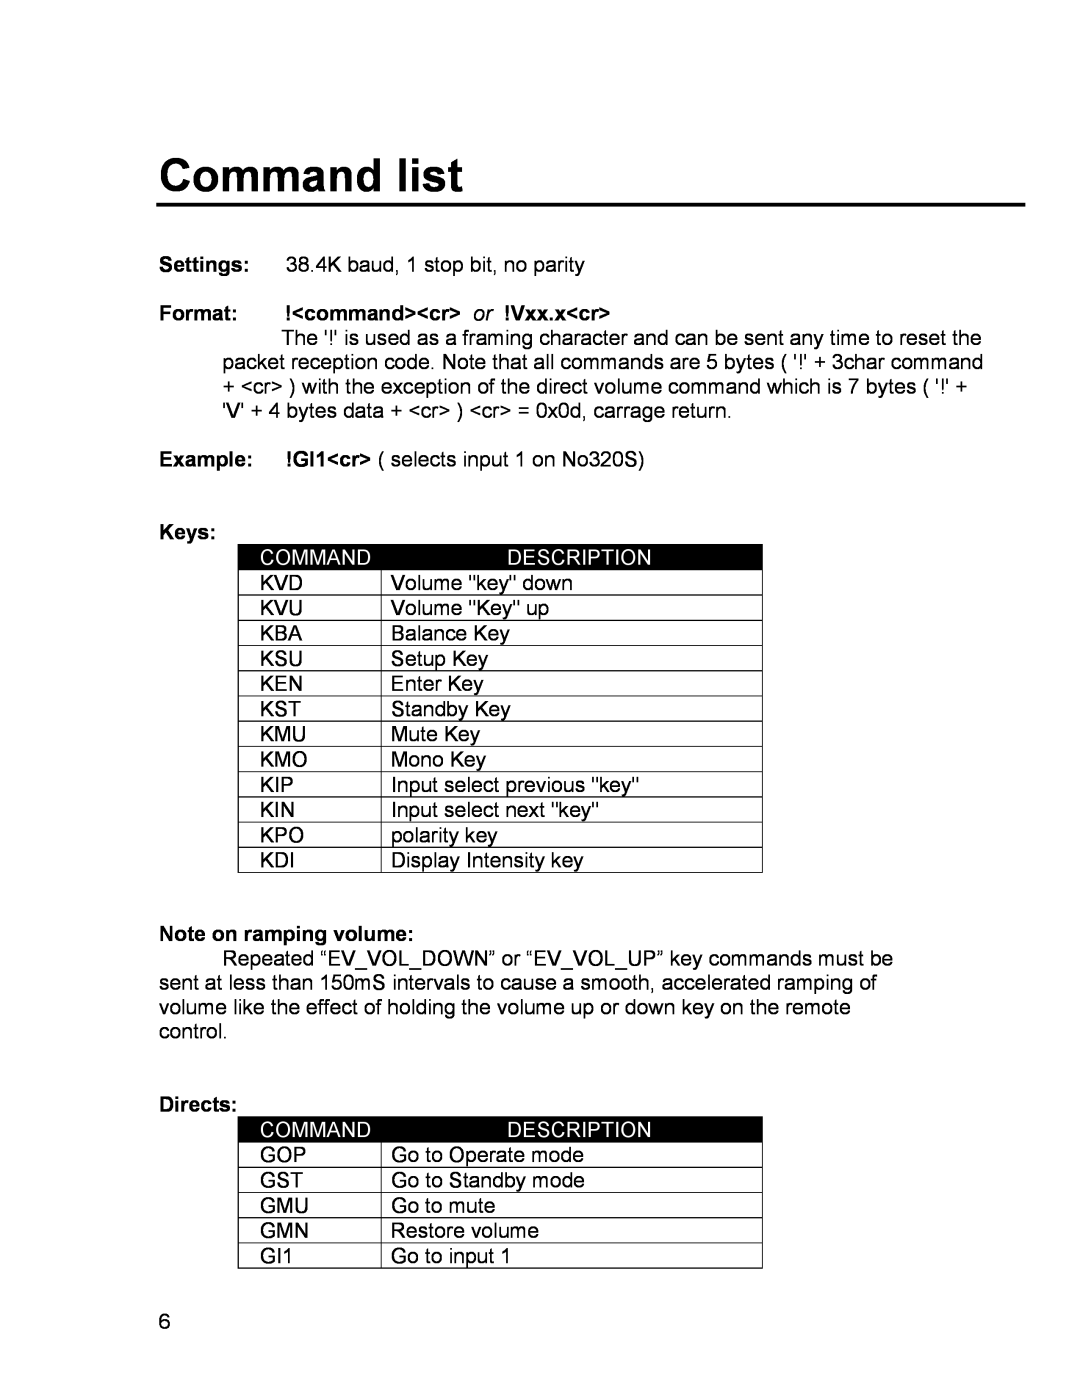 Mark Levinson RS-232 Command list, Format ! command cr or !Vxx.x cr, Keys, Description, Note on ramping volume, Directs 